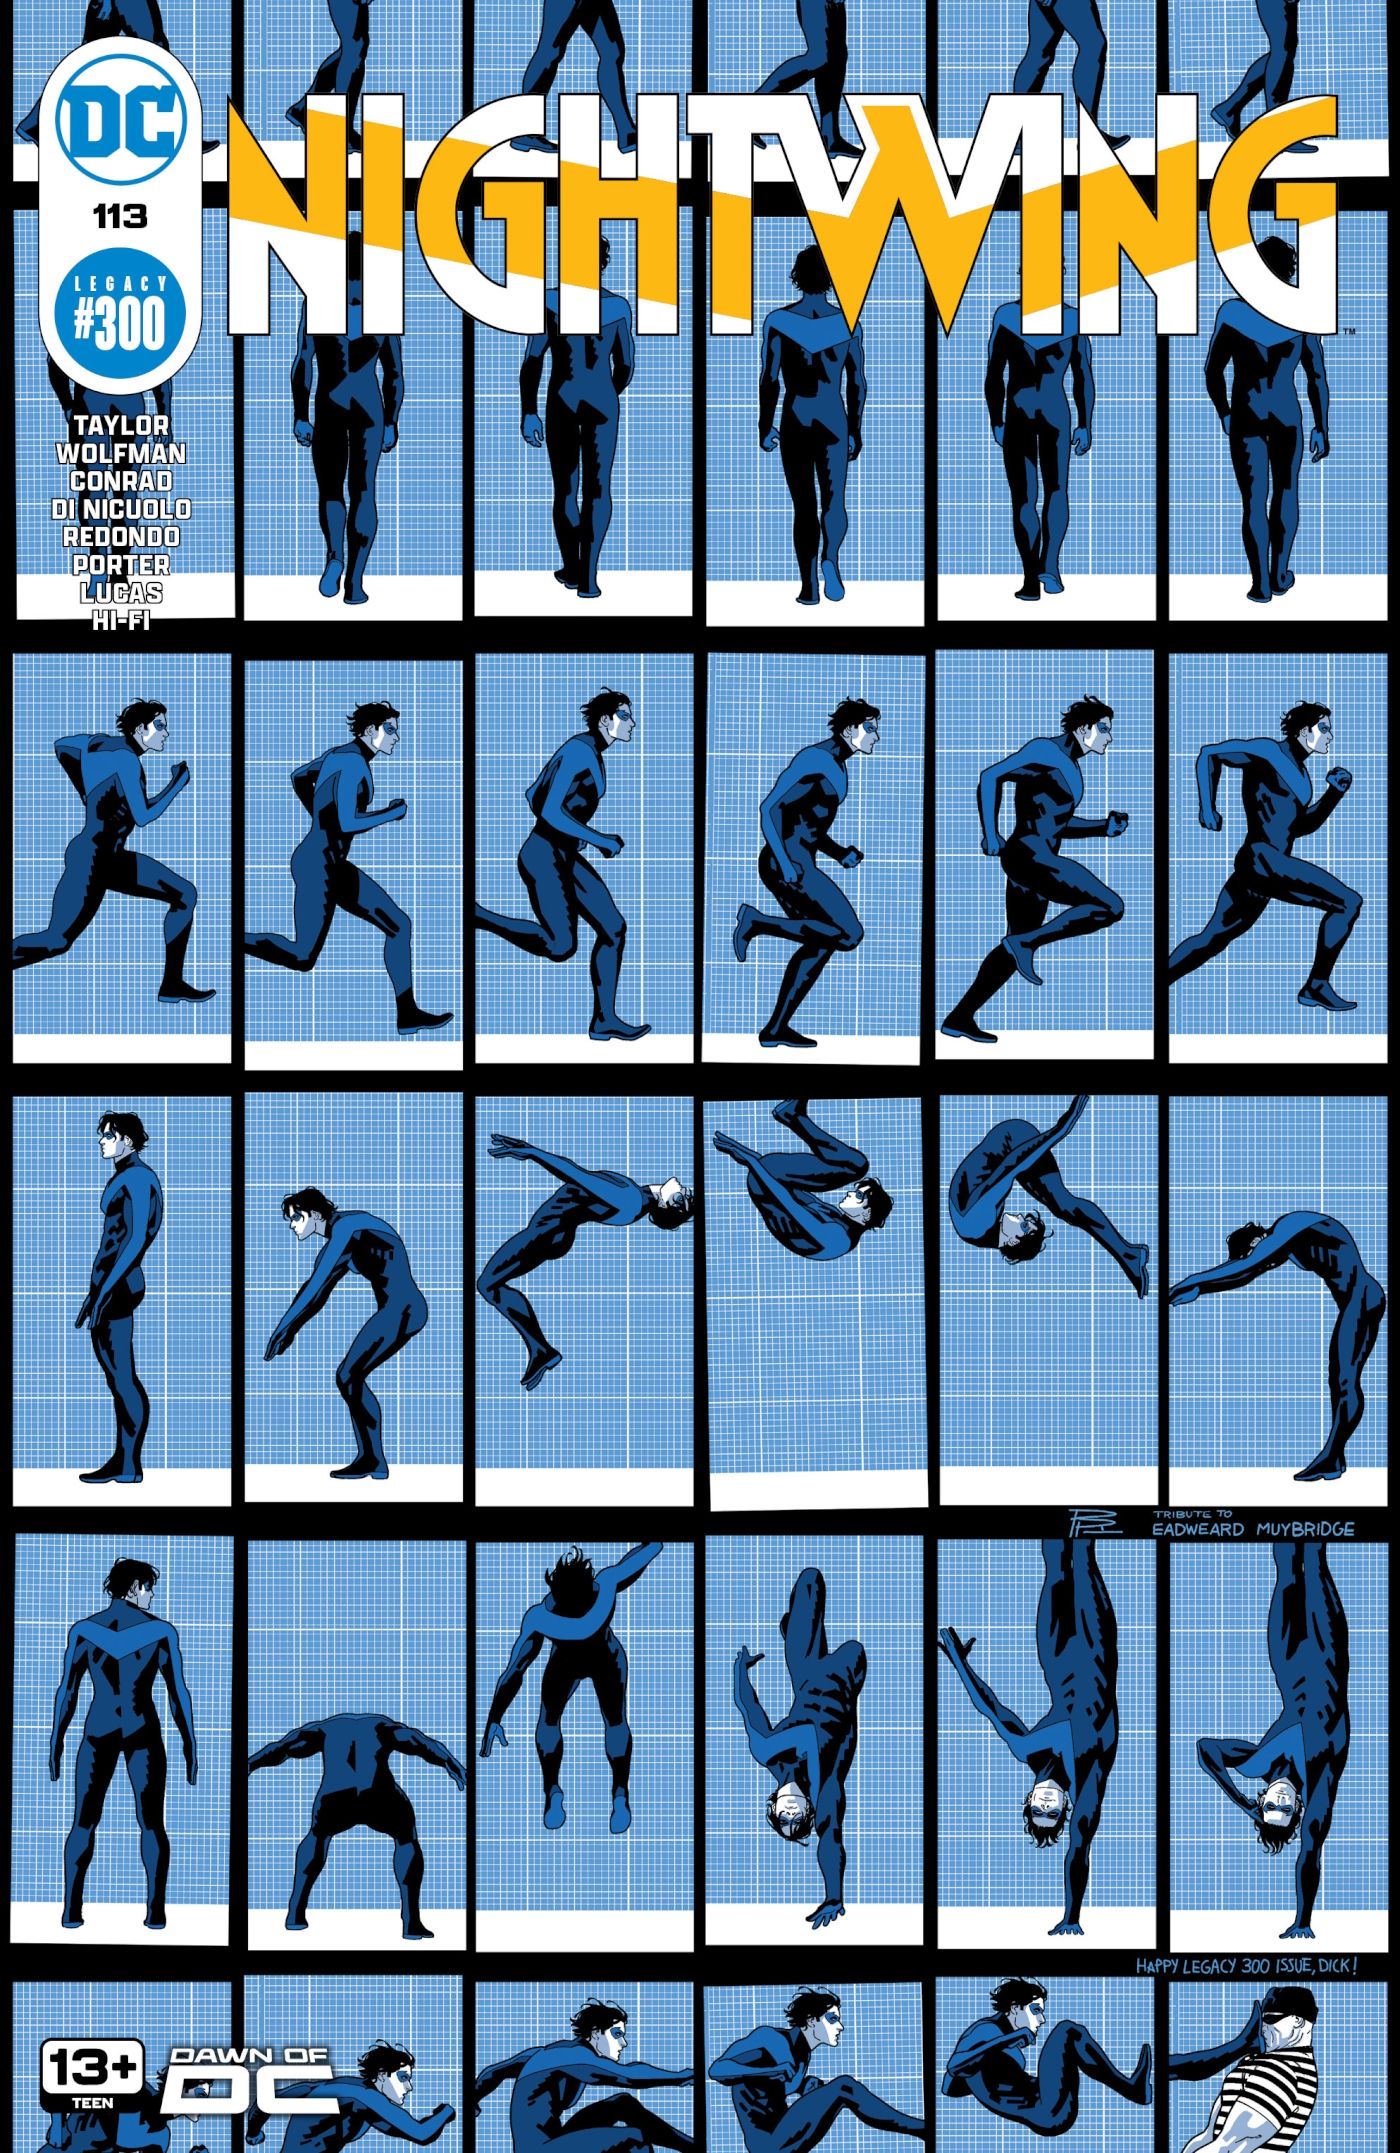 Nightwing 113 Main Cover: Nightwing doing flips in different animation cells.